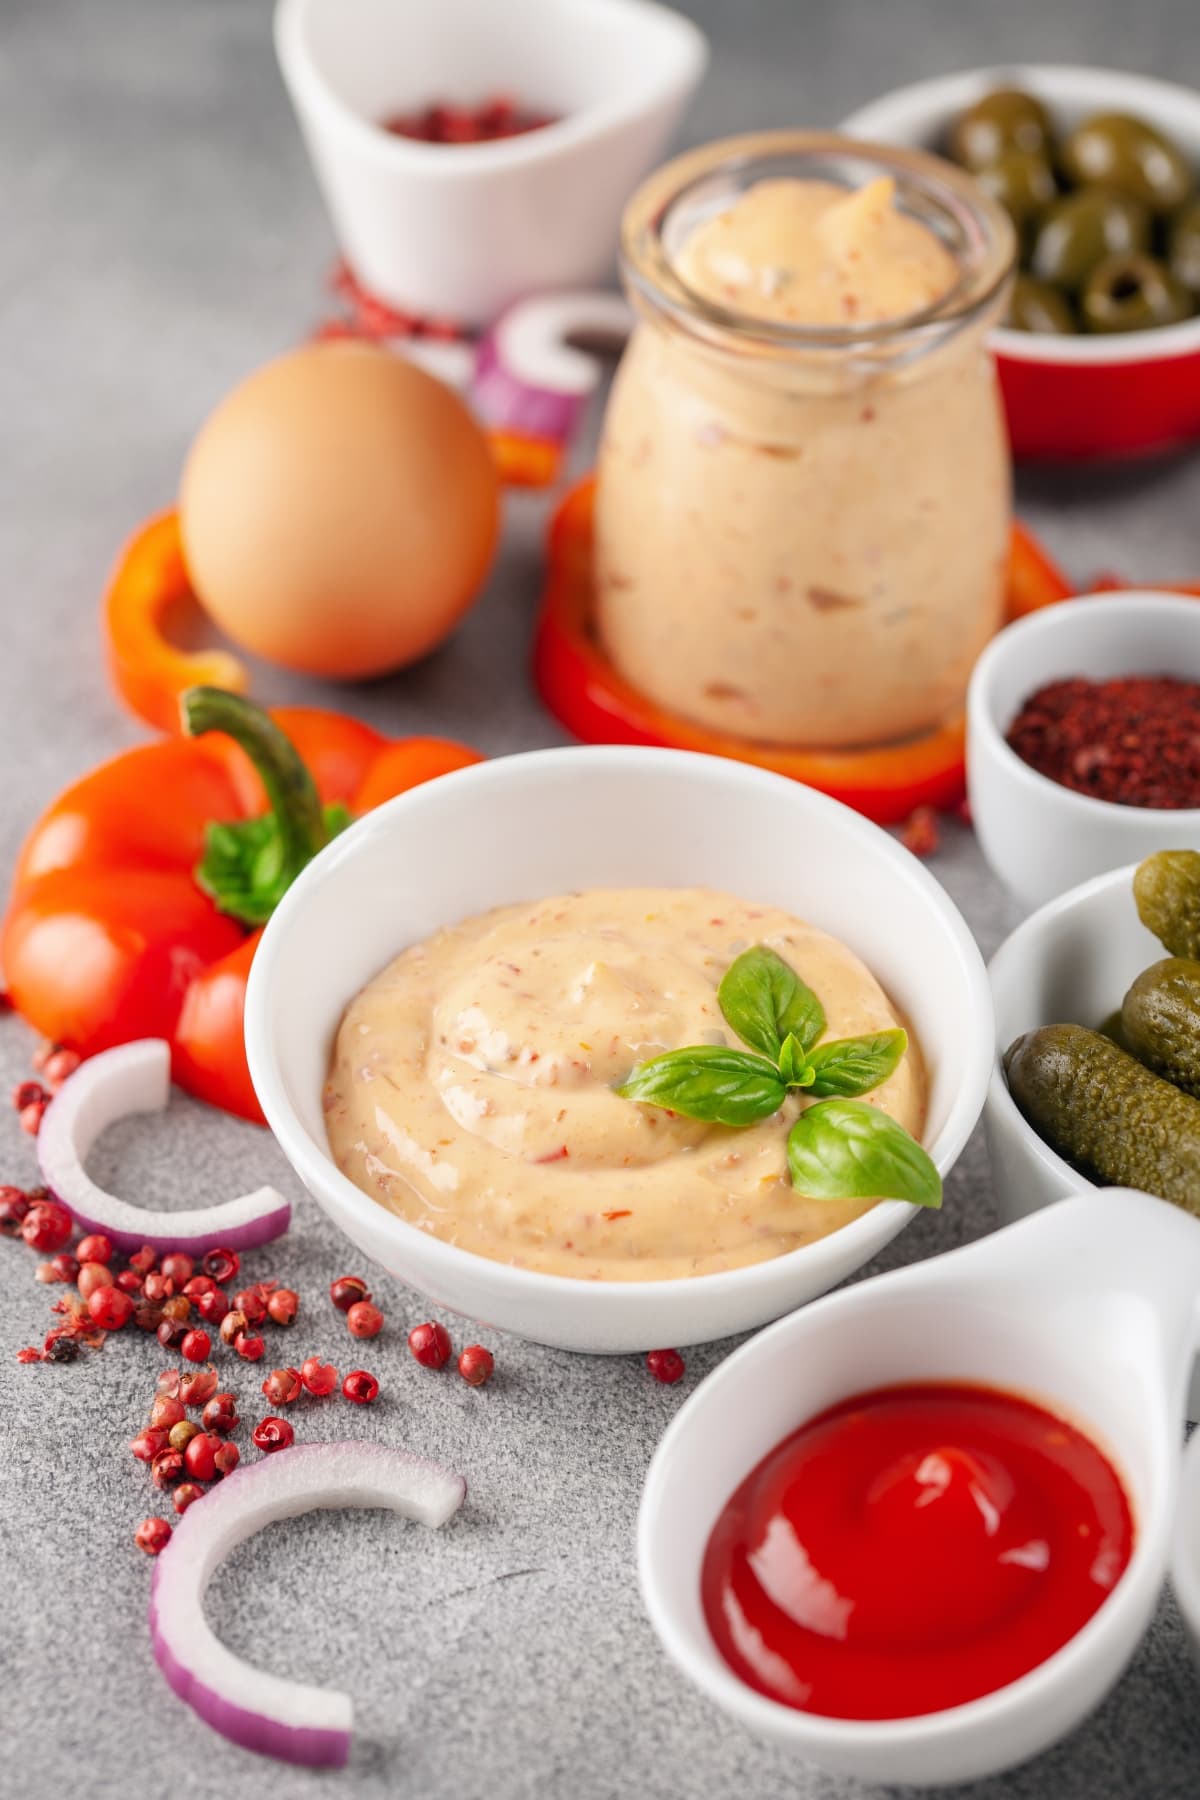 Thousand Island Dressing with Ingredients - Onions, Ketchup, Tomatoes and Pickle Relish